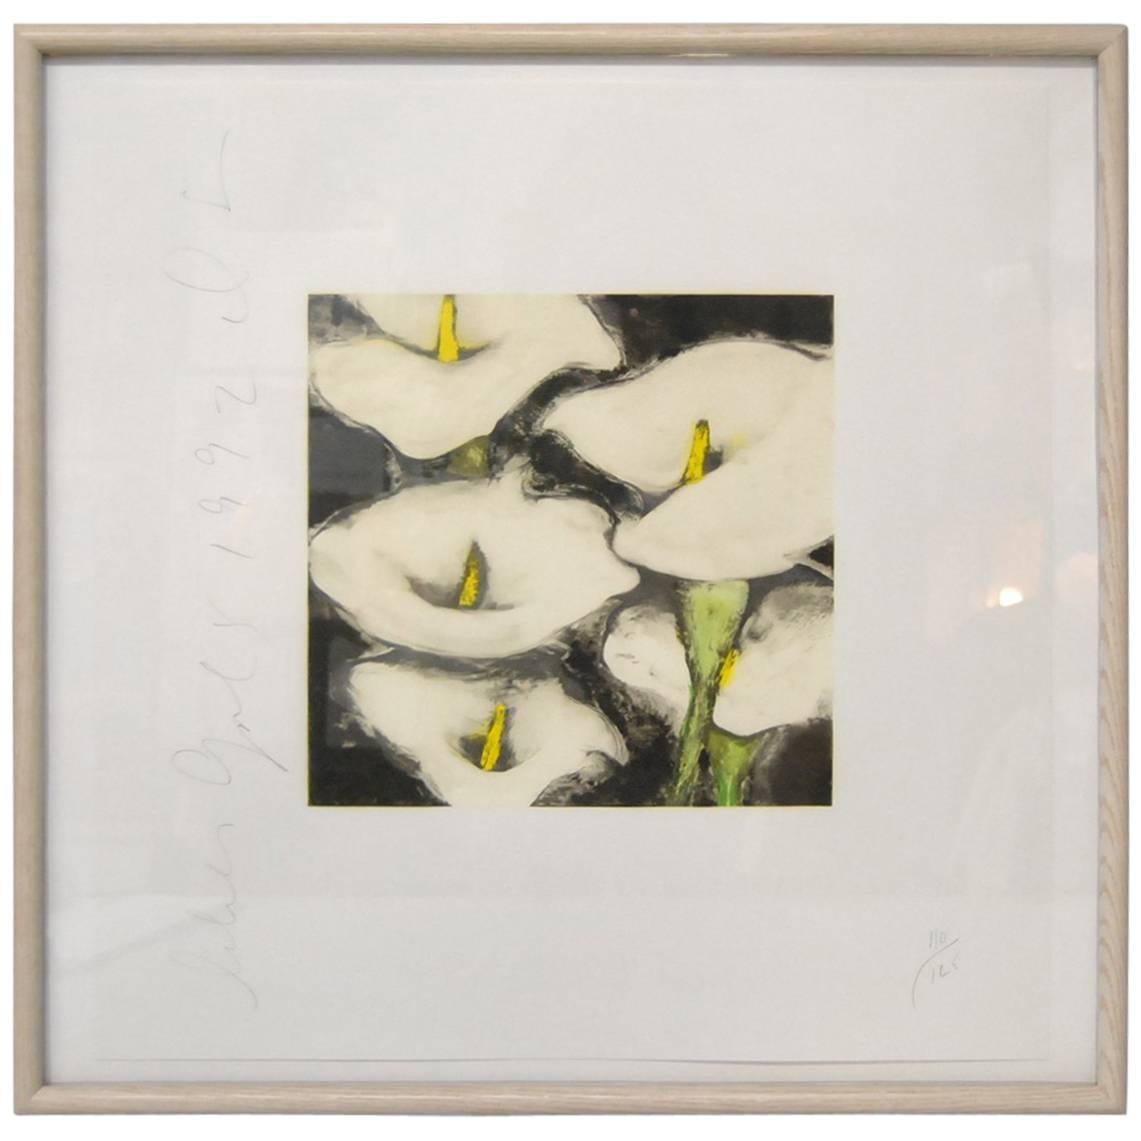 Donald Sultan Print, "Lillies" Signed and Numbered 110/125, 1992